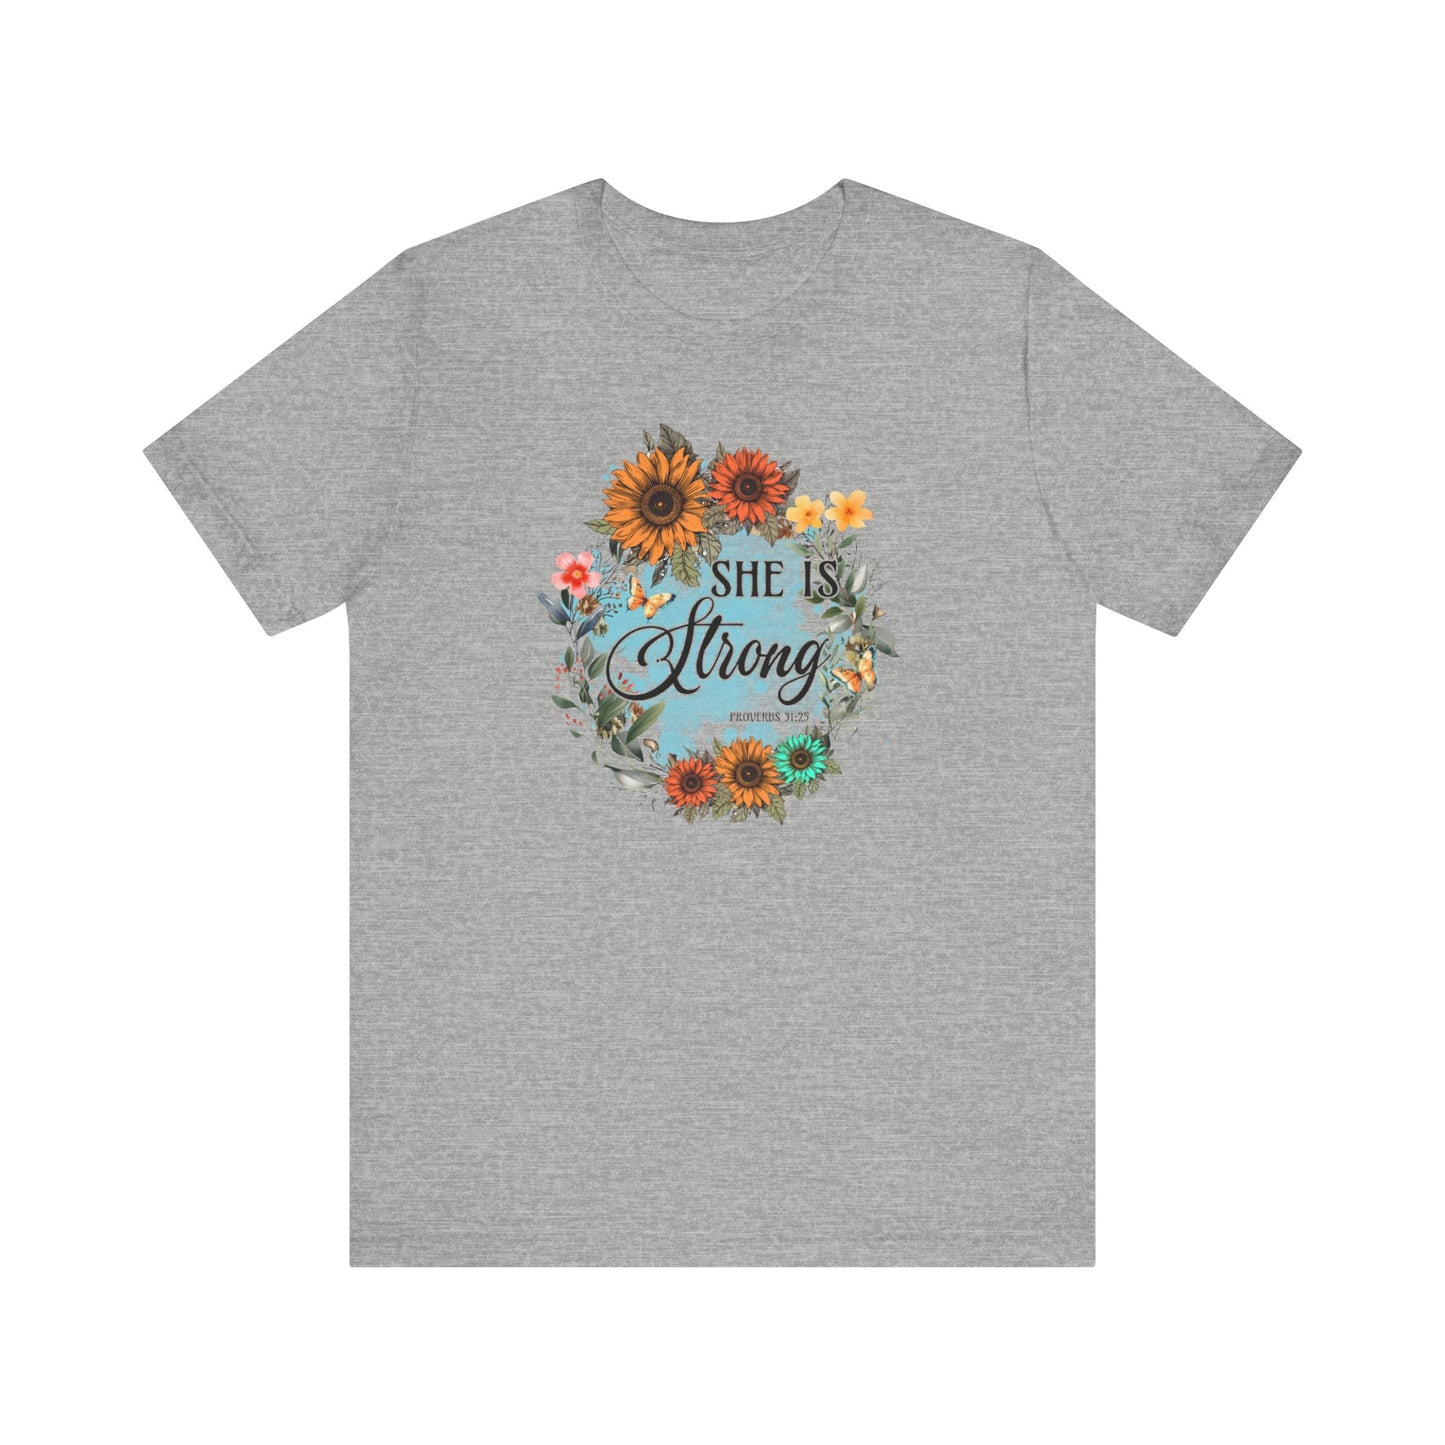 She Is Strong Shirt, Mother's Day Gift, Mom Tee, Mama Flower Tshirt (Mom-19)